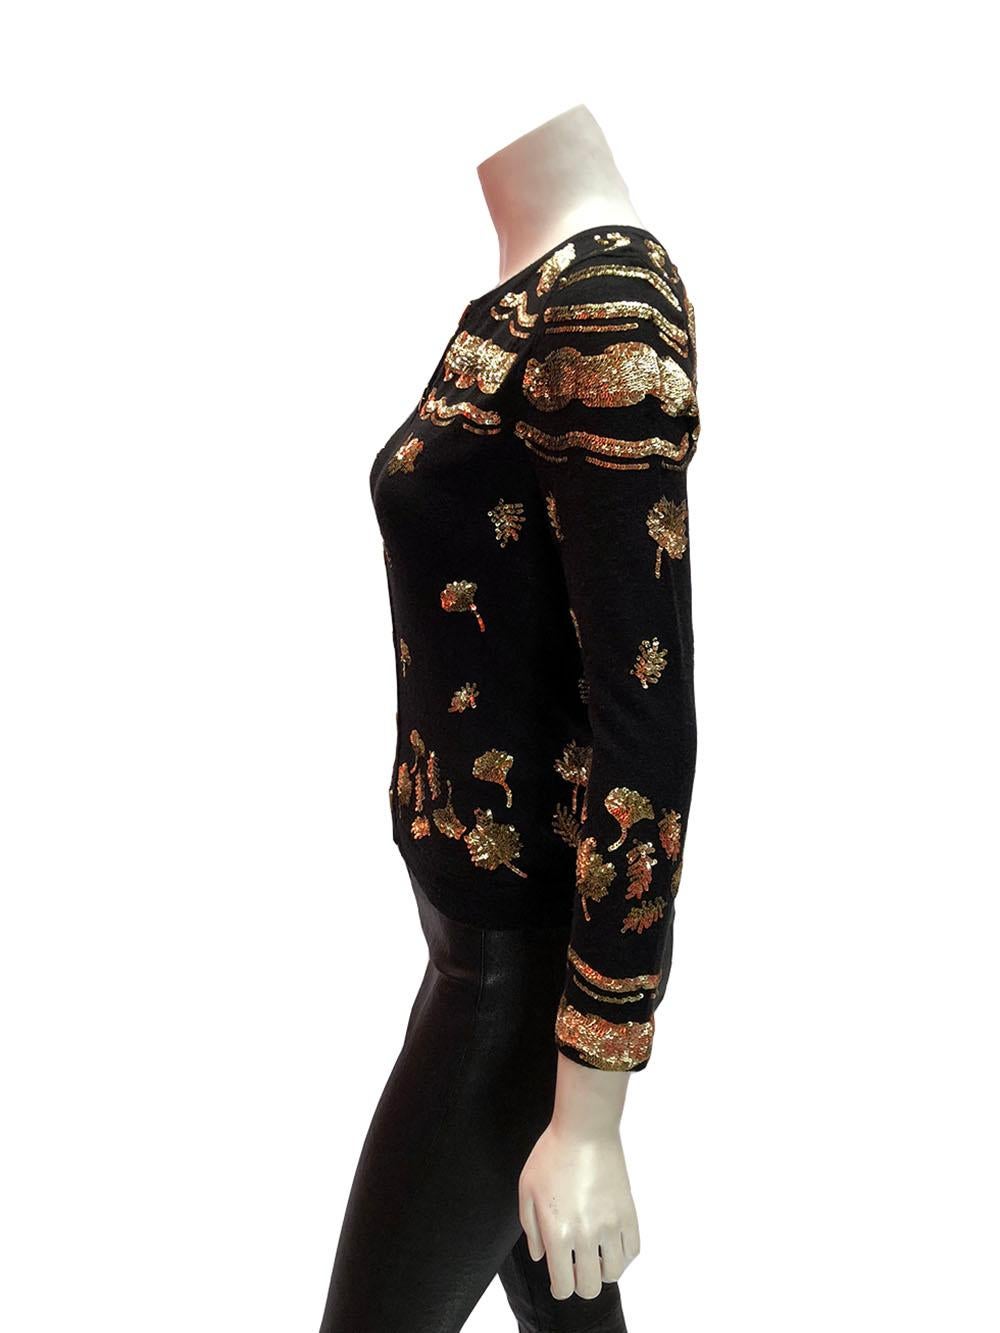 Prabal Gurung Black and Gold Sequin Dandelion Flower Cardigan

Black cashmere cardigan with gold sequins in a floral dandelion design by Prabal Gurung. Gold bar buttons. So incredibly soft. Size small. 